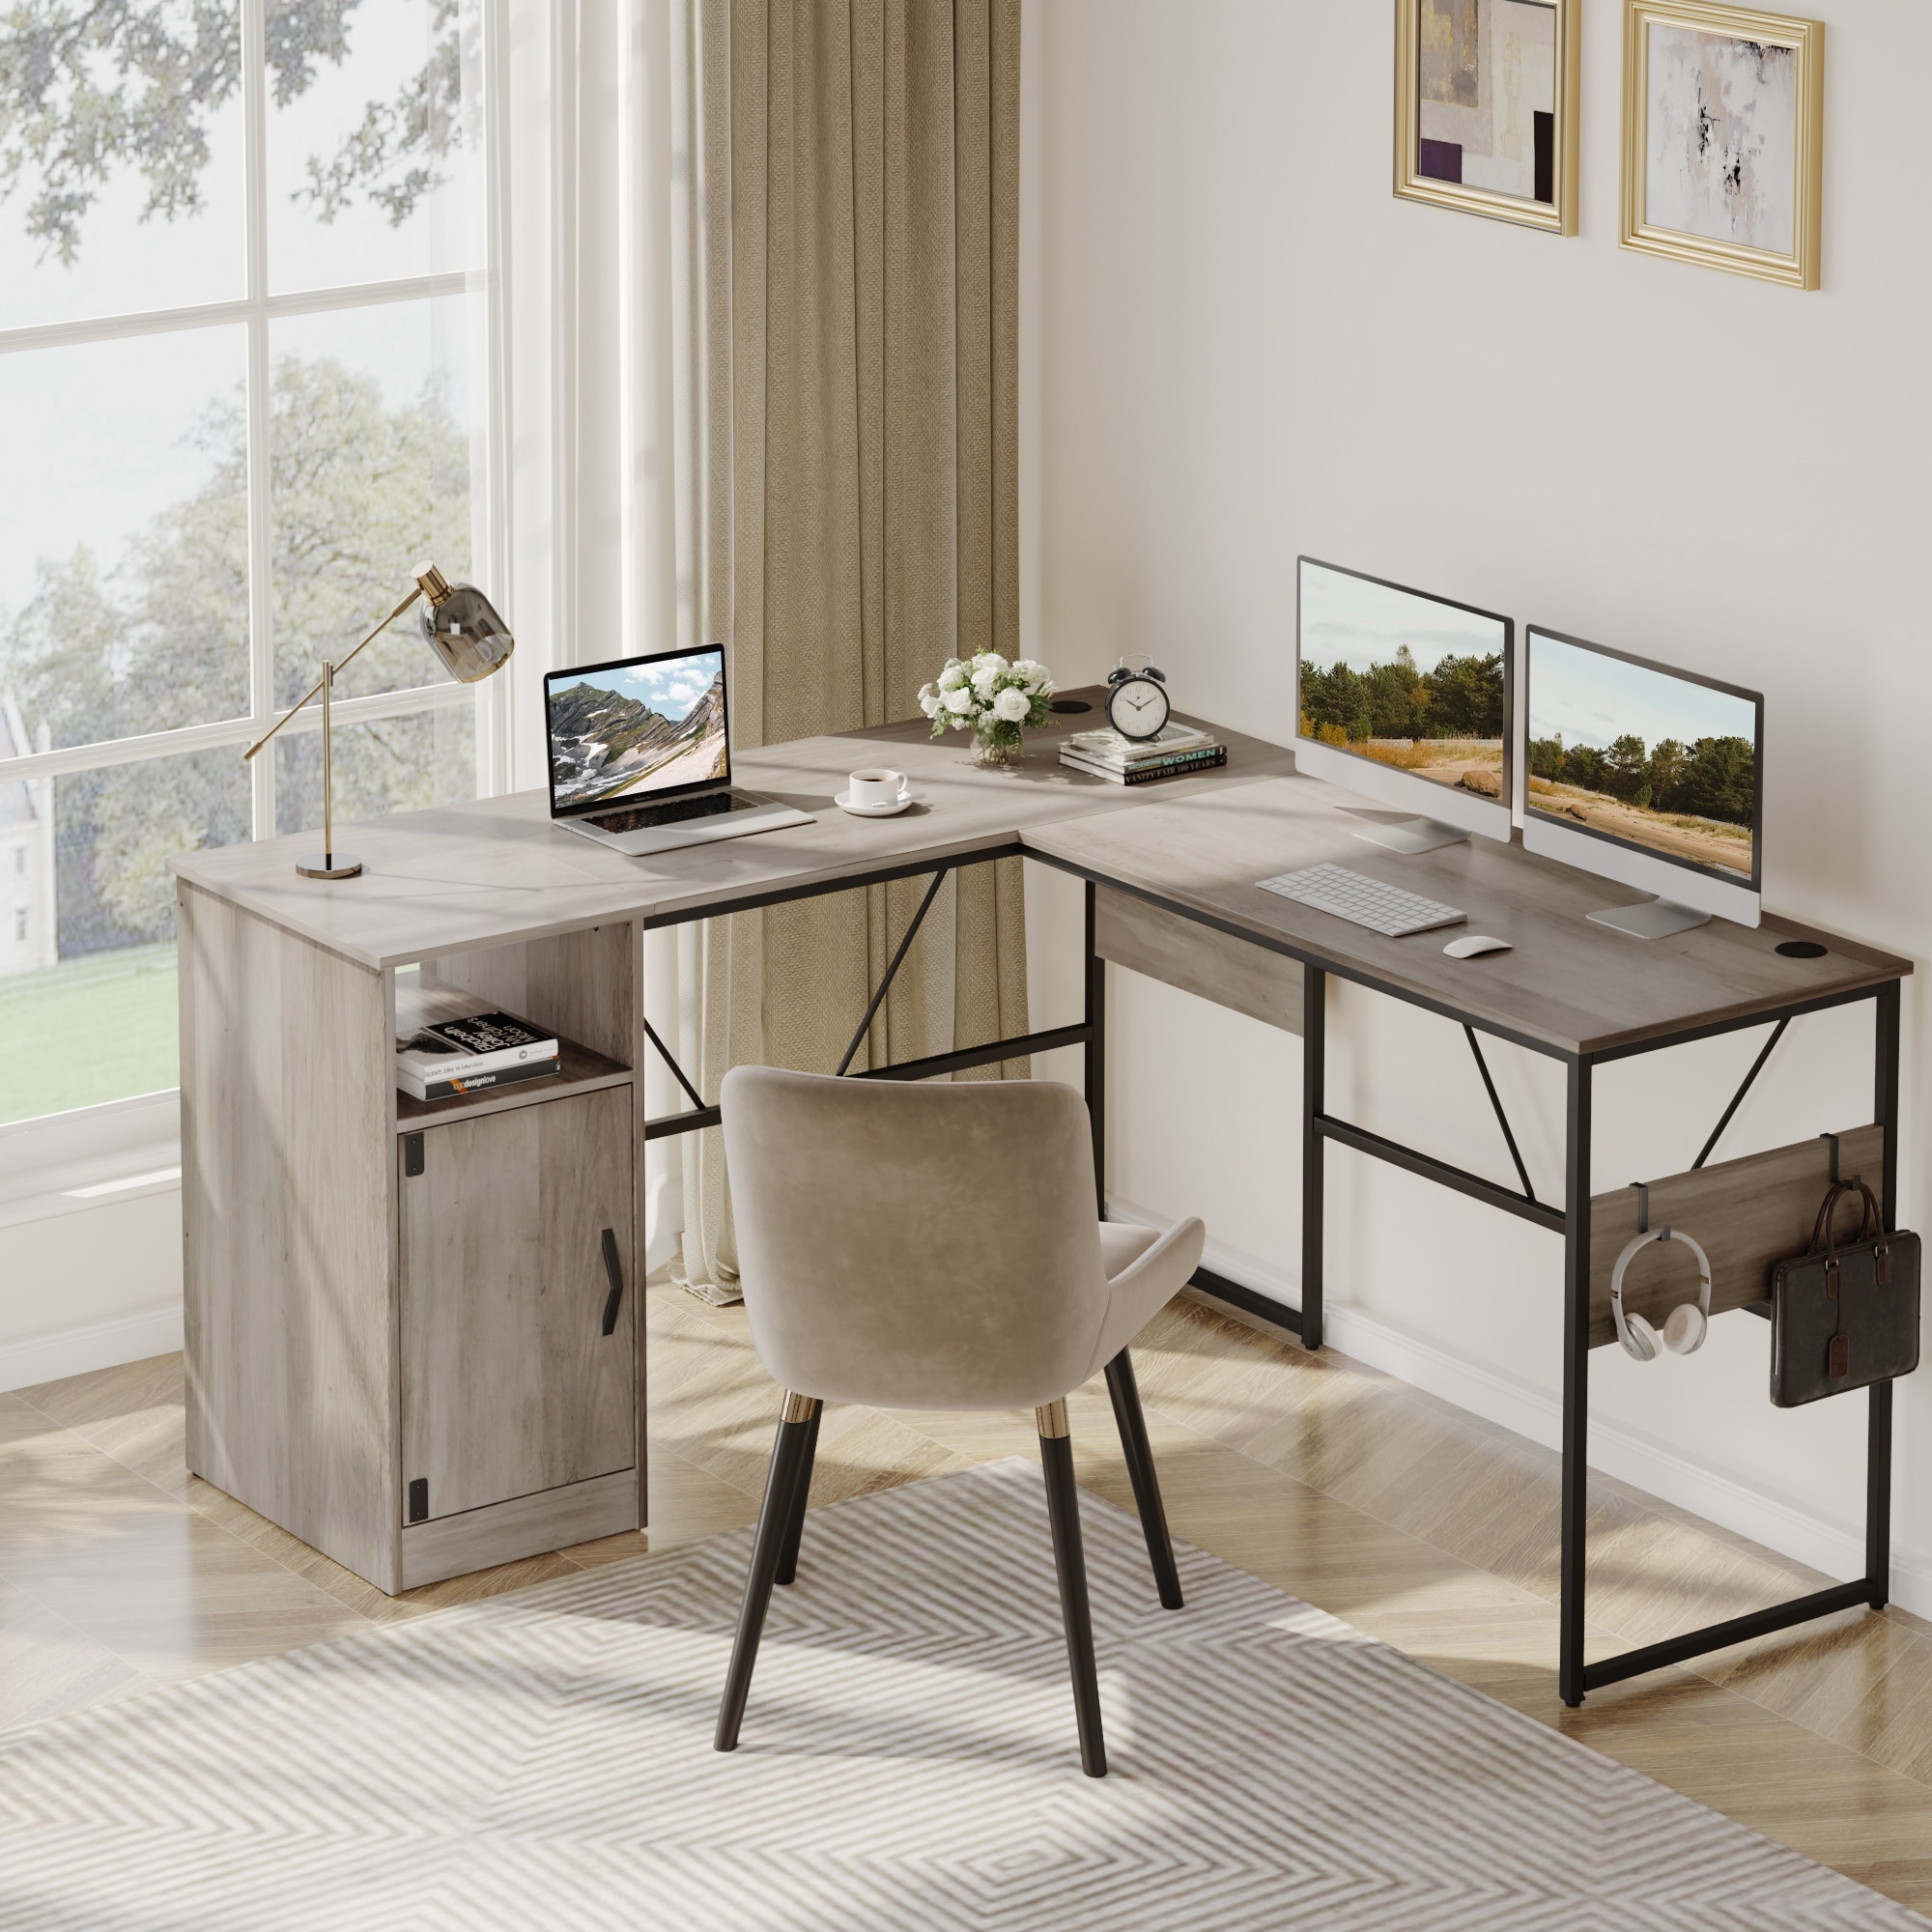 https://ak1.ostkcdn.com/images/products/is/images/direct/1edf66da171db3e59088c32c31af4716472accbe/60%27%27-L-shaped-Desk-with-Storage-Cabinet-Office-Computer-Desk.jpg